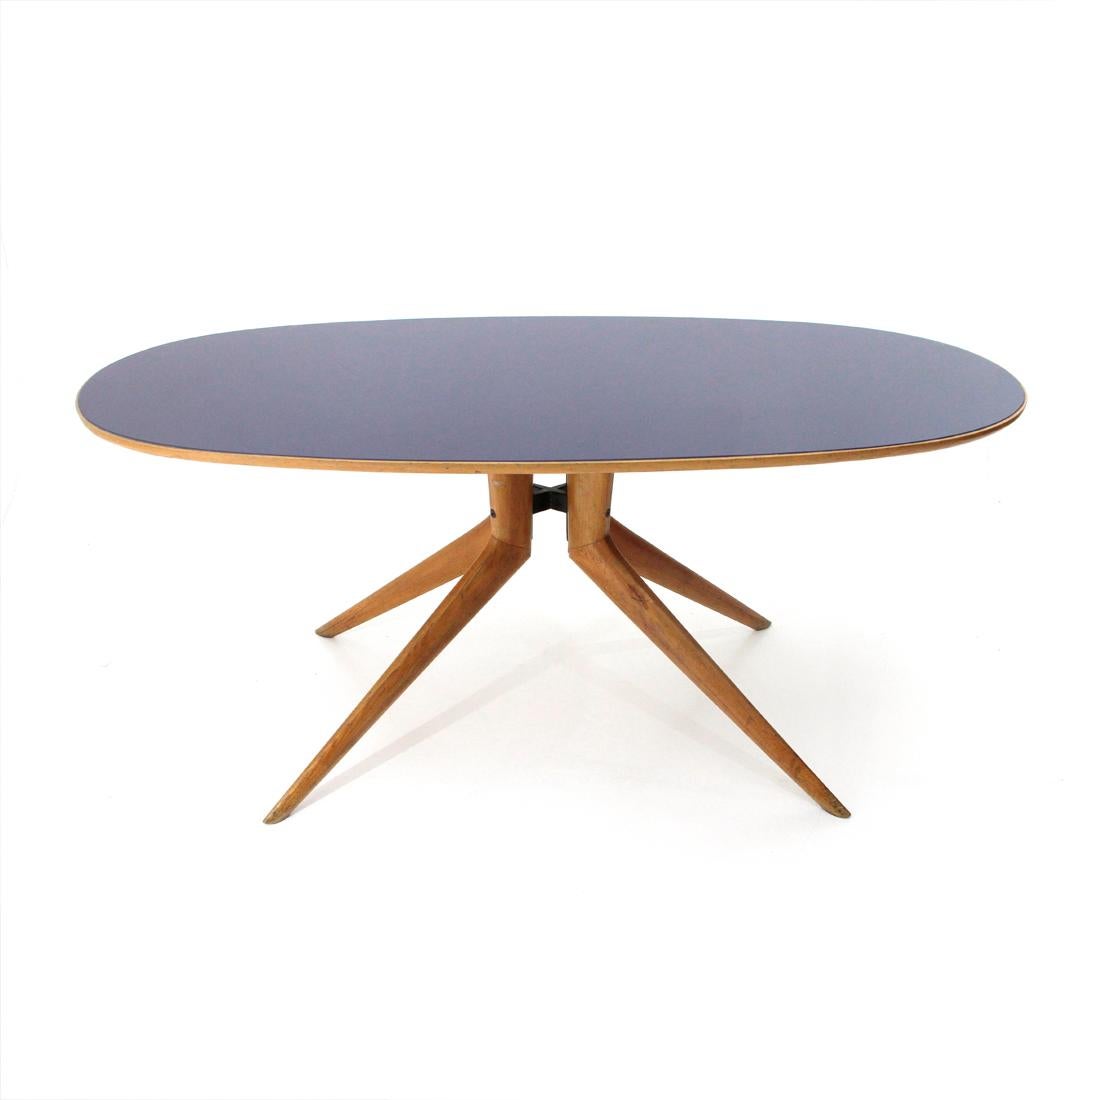 Italian manufacture table produced in the 1950s.
Oval wooden top with tapered edges with blue glass surface.
Central foot with black painted metal pin and shaped solid wood legs.
Good general conditions, some signs due to normal use over